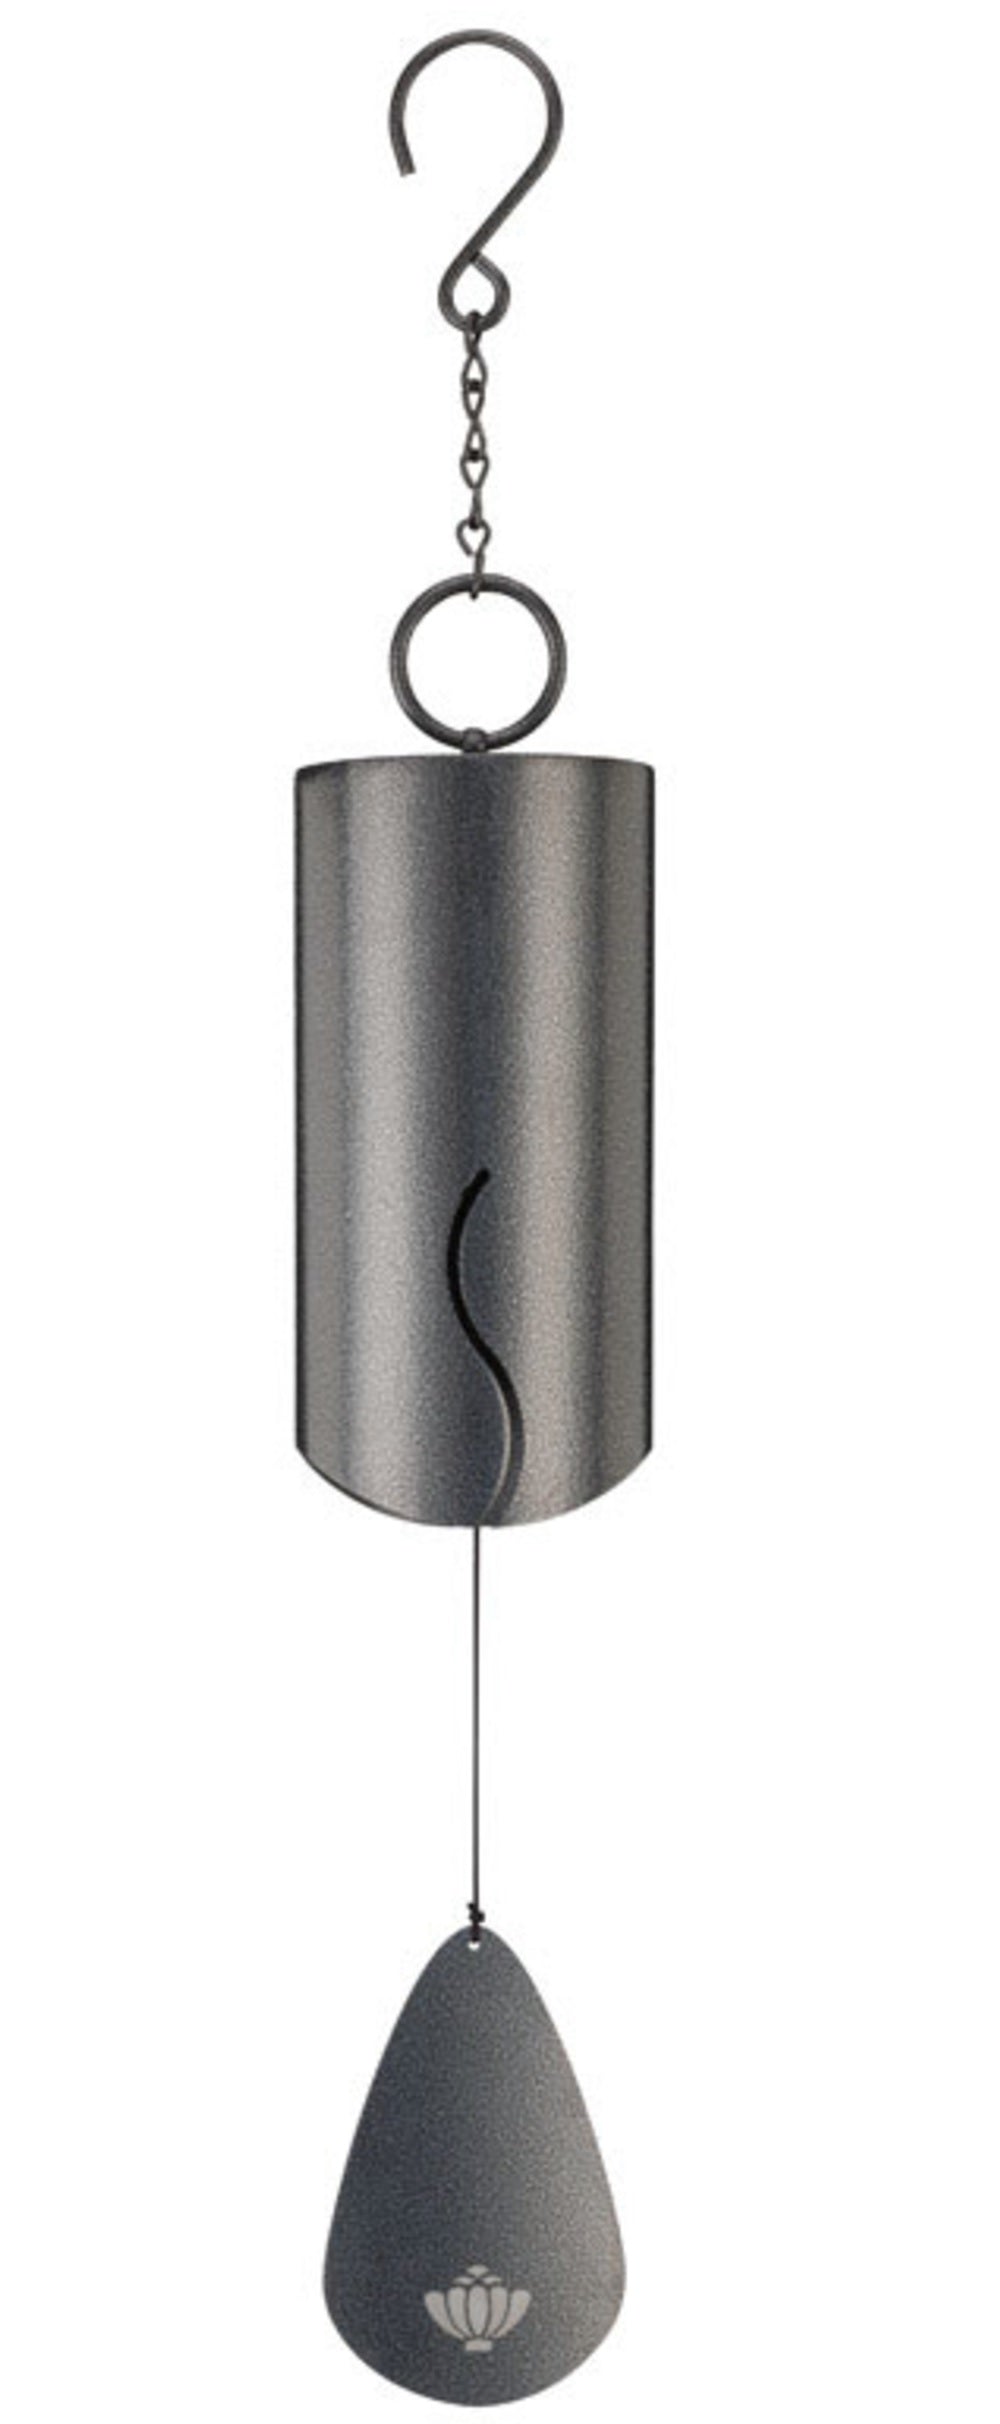 Regal Art & Gift 11438 Bell Wind Chime, Silver